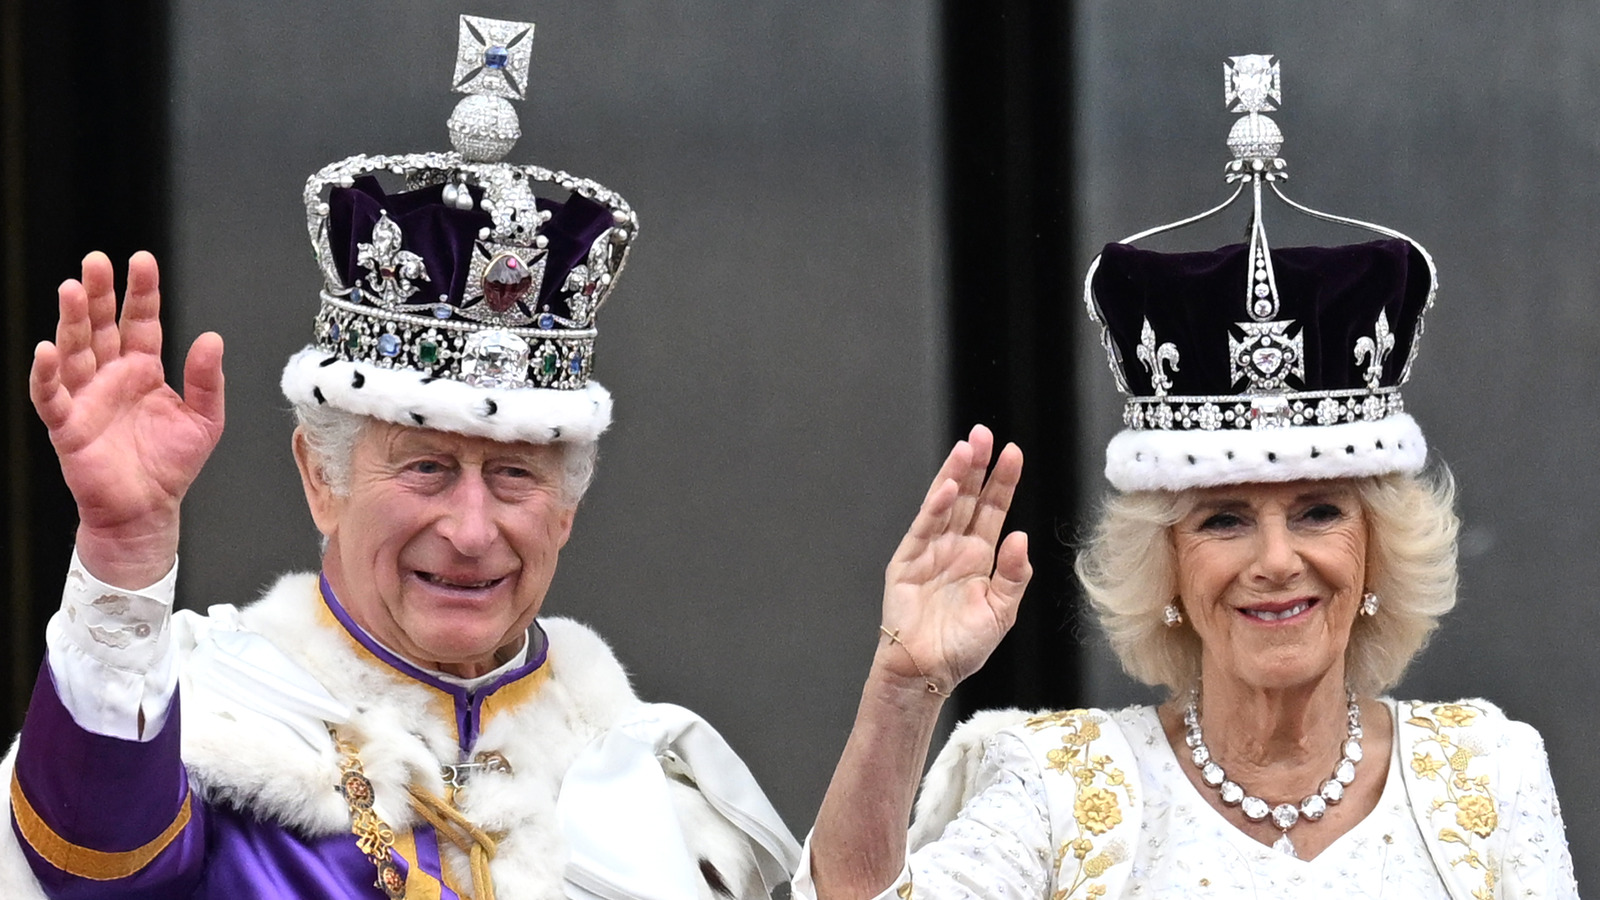 Strange British Royal Rituals And Traditions You Probably Don't Know About